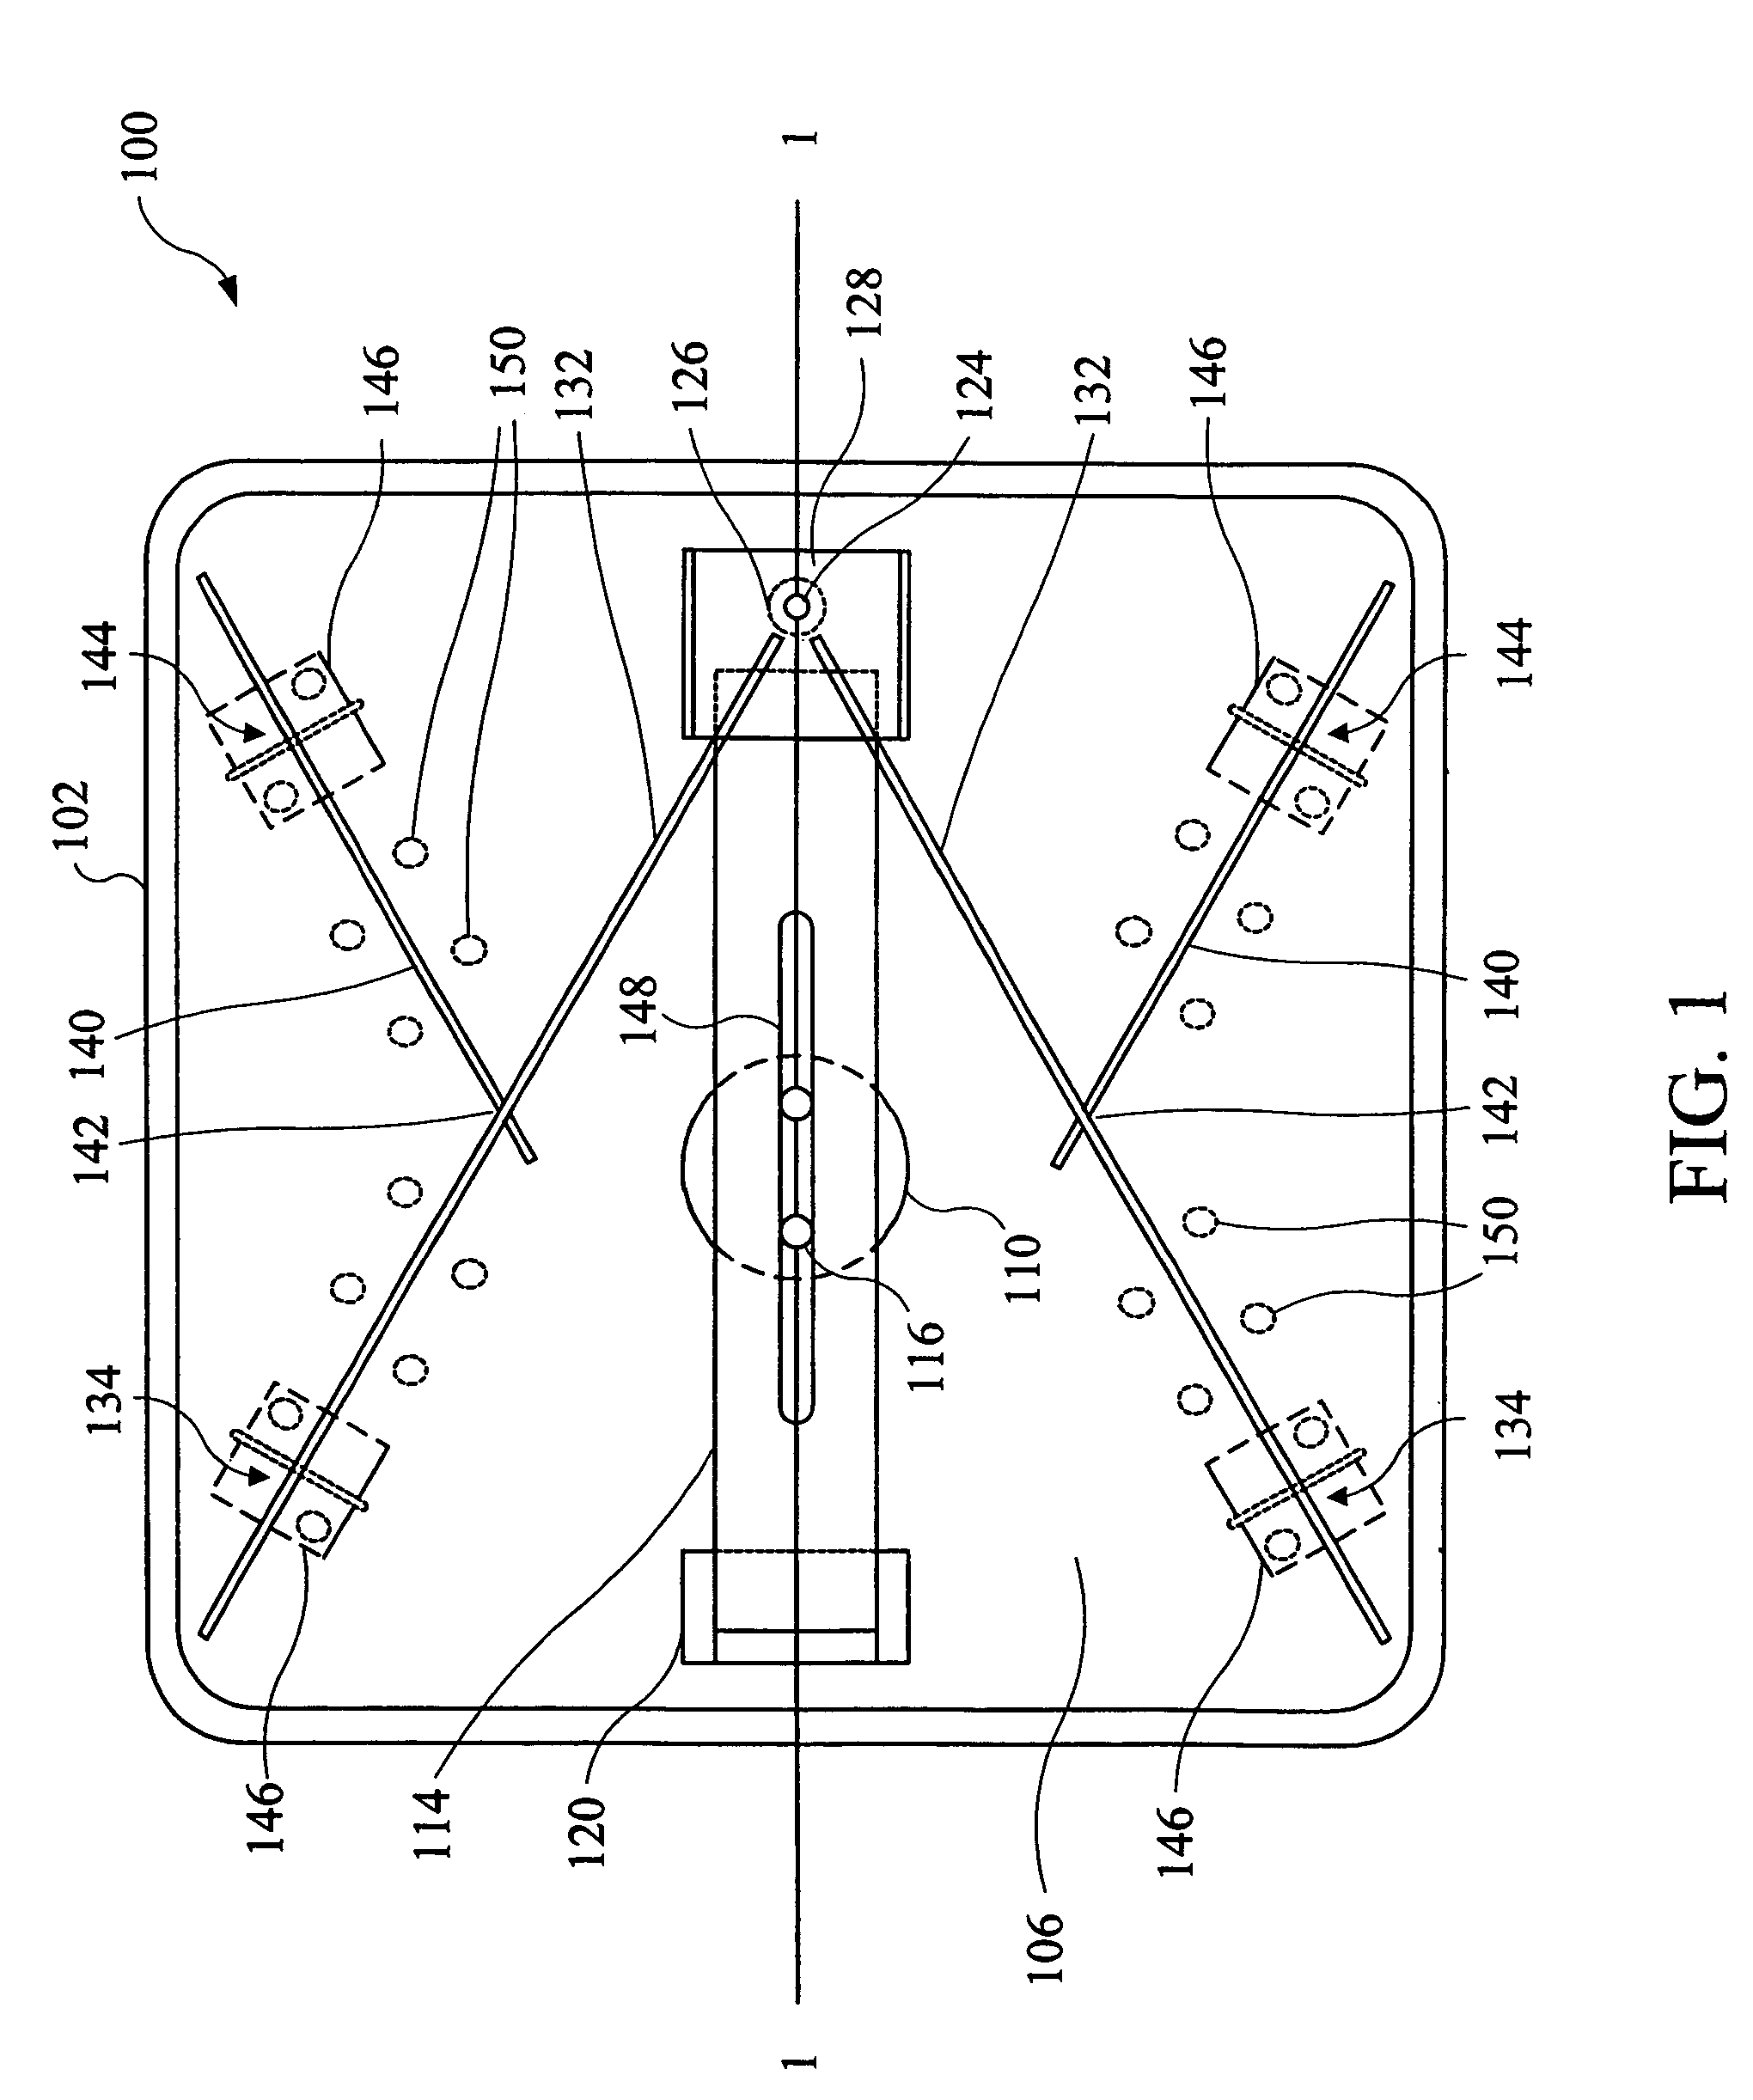 Apparatus and methods for therapeutically treating damaged tissues, bone fractures, osteopenia, or osteoporosis